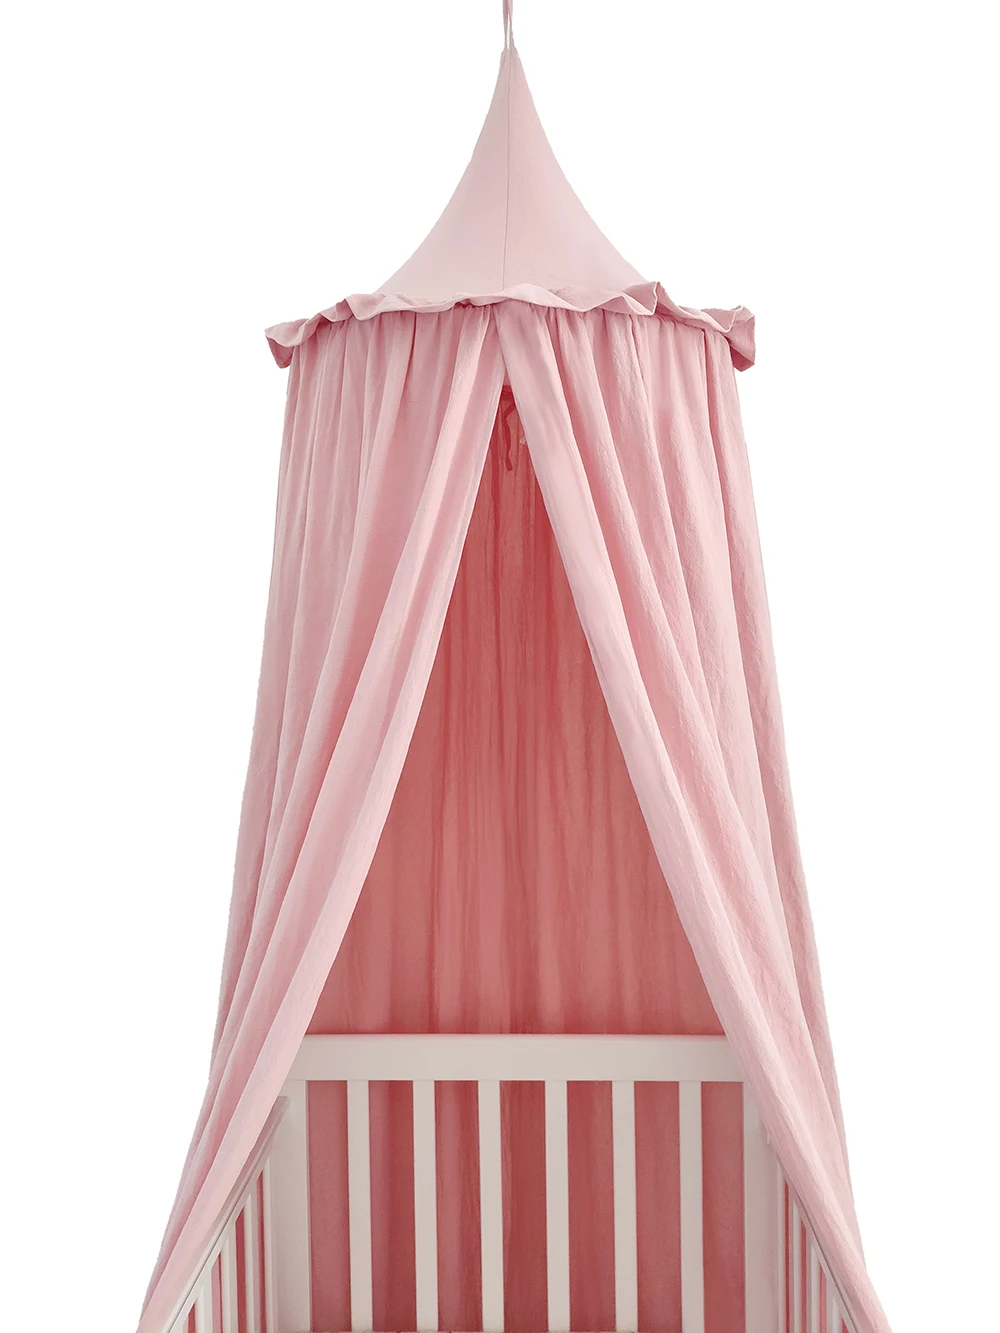 baby canopy tent mosquito net bed curtain baby crib netting cot hung dome girl princess children play tent kids room decoration 100%  Cotton Crib Kids Room Deco Baldachin with Frill Bed Curtain Canopy for Nursery